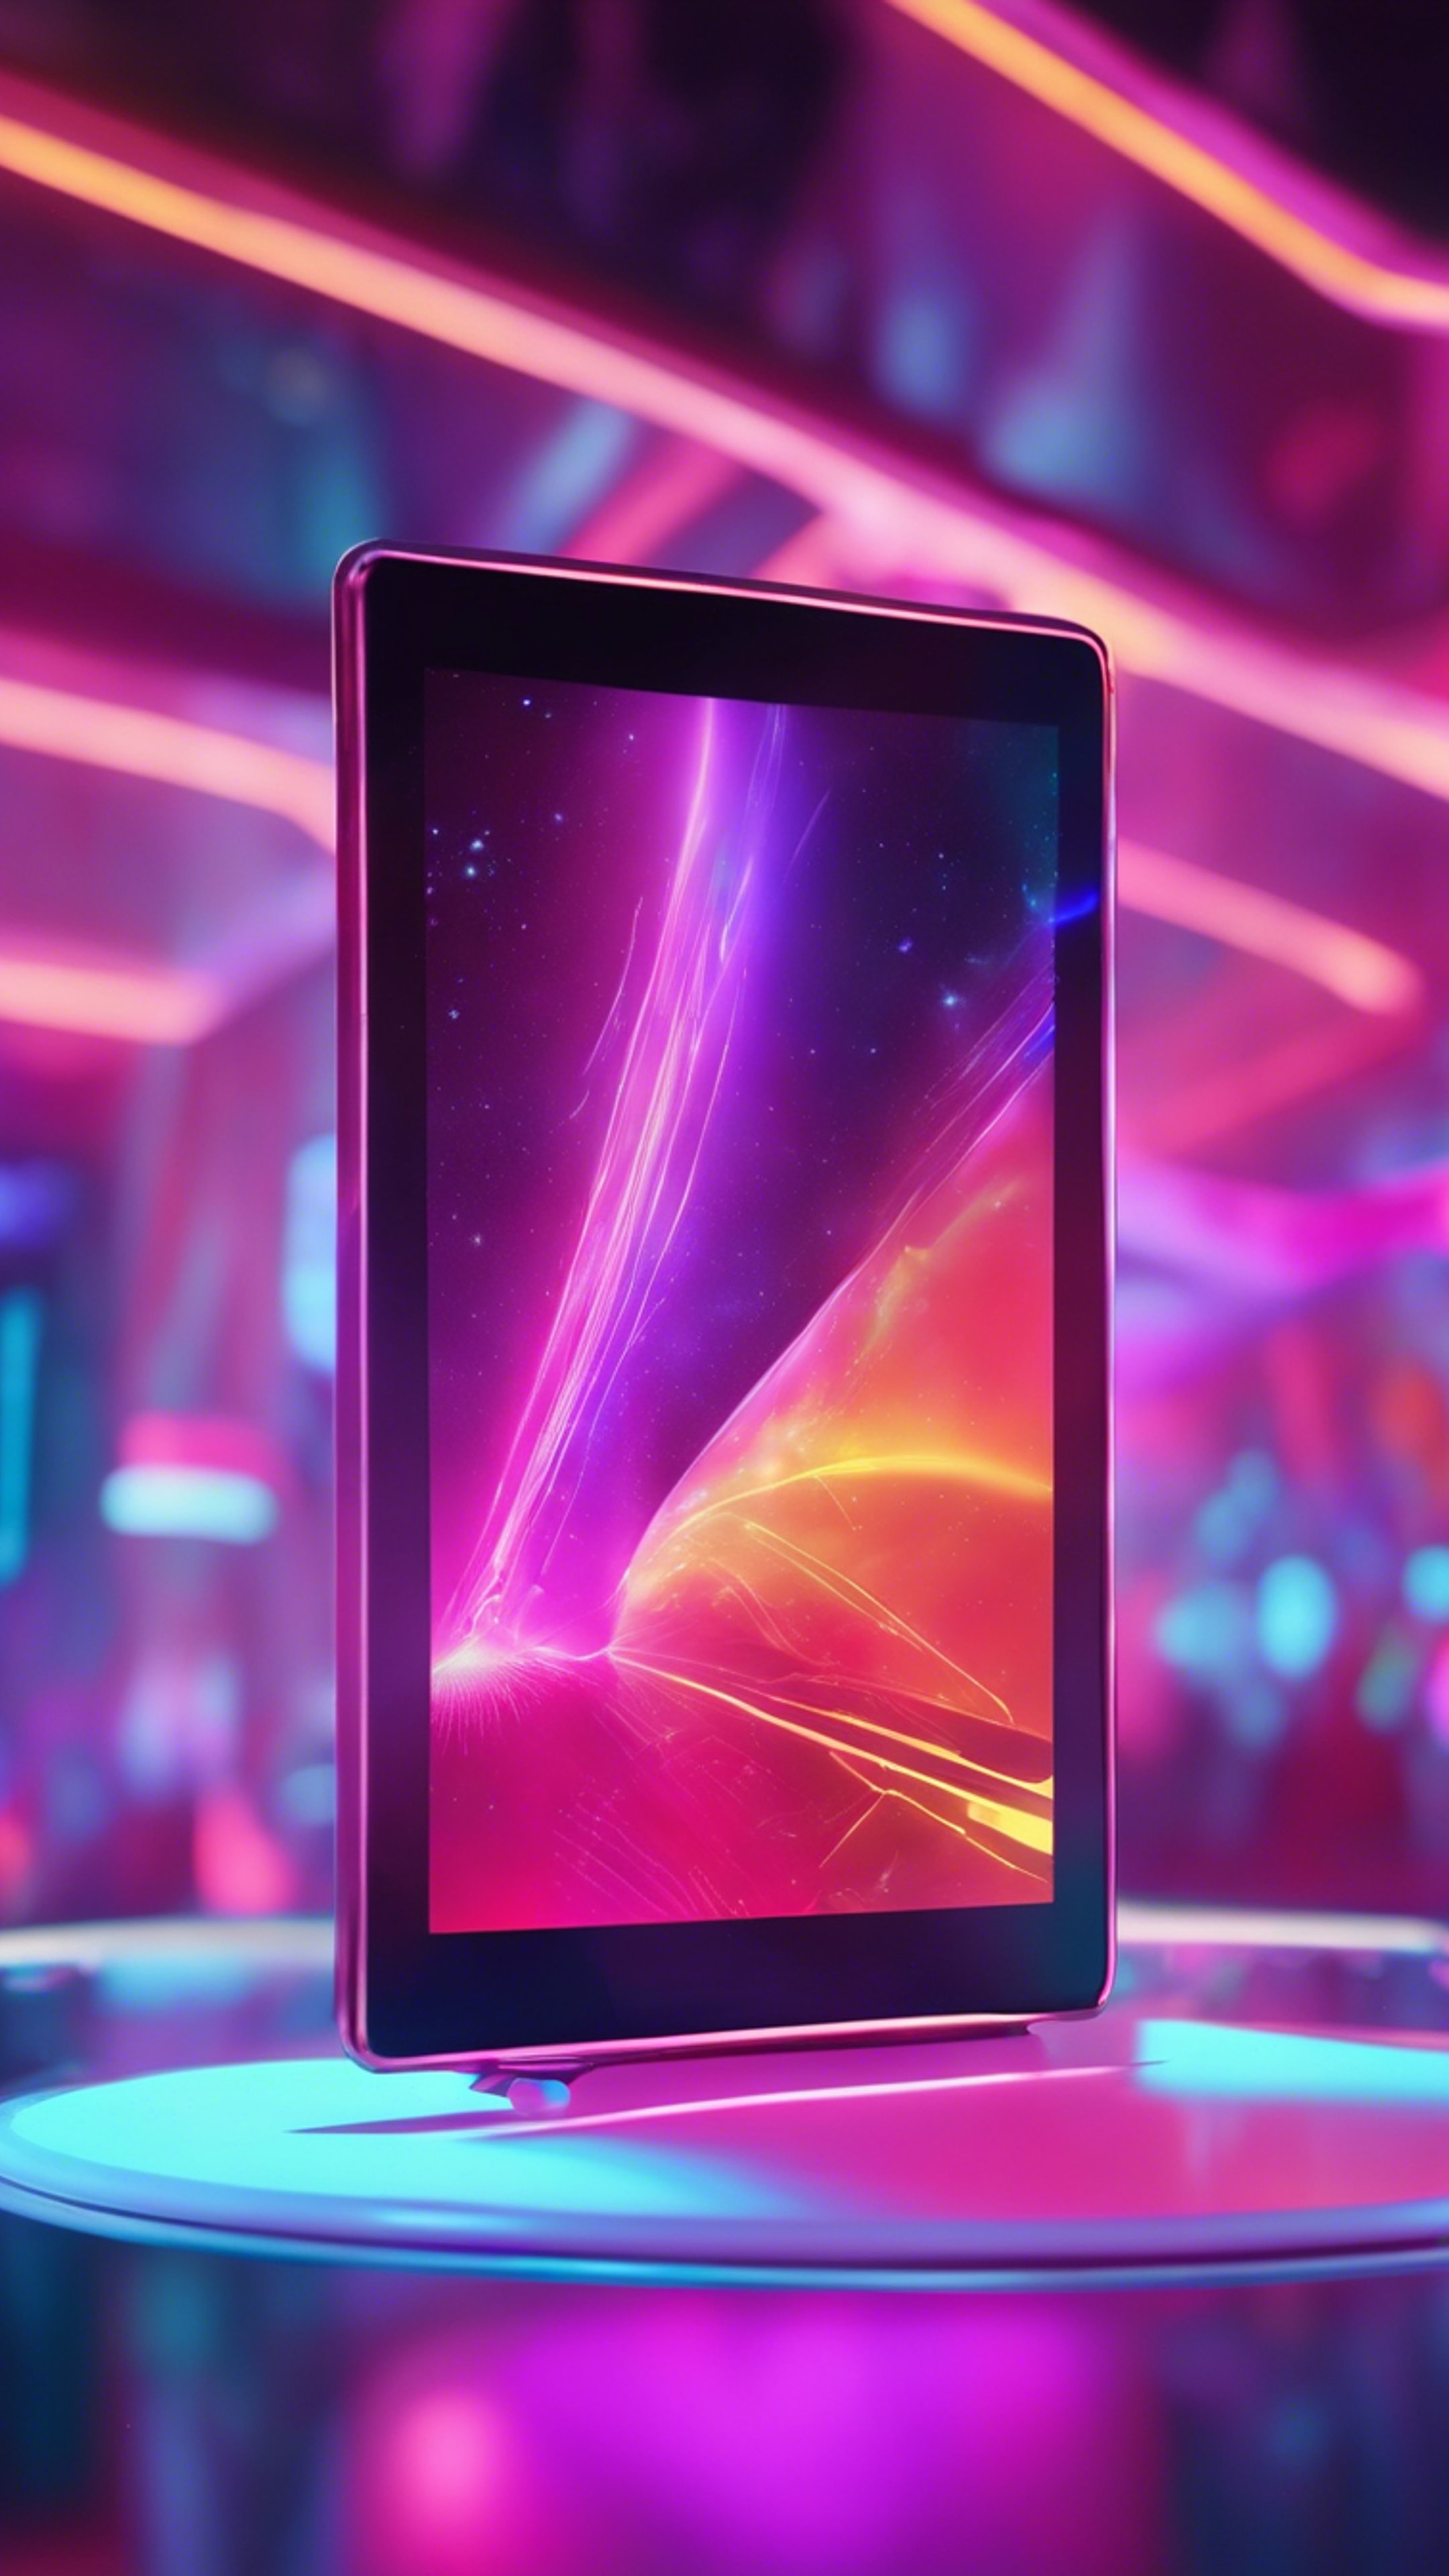 An ultra-modern tablet with a holographic touch screen floating in a futuristic, vividly colored neon environment. Hintergrund[25bfd648fdfb4eaf80d5]